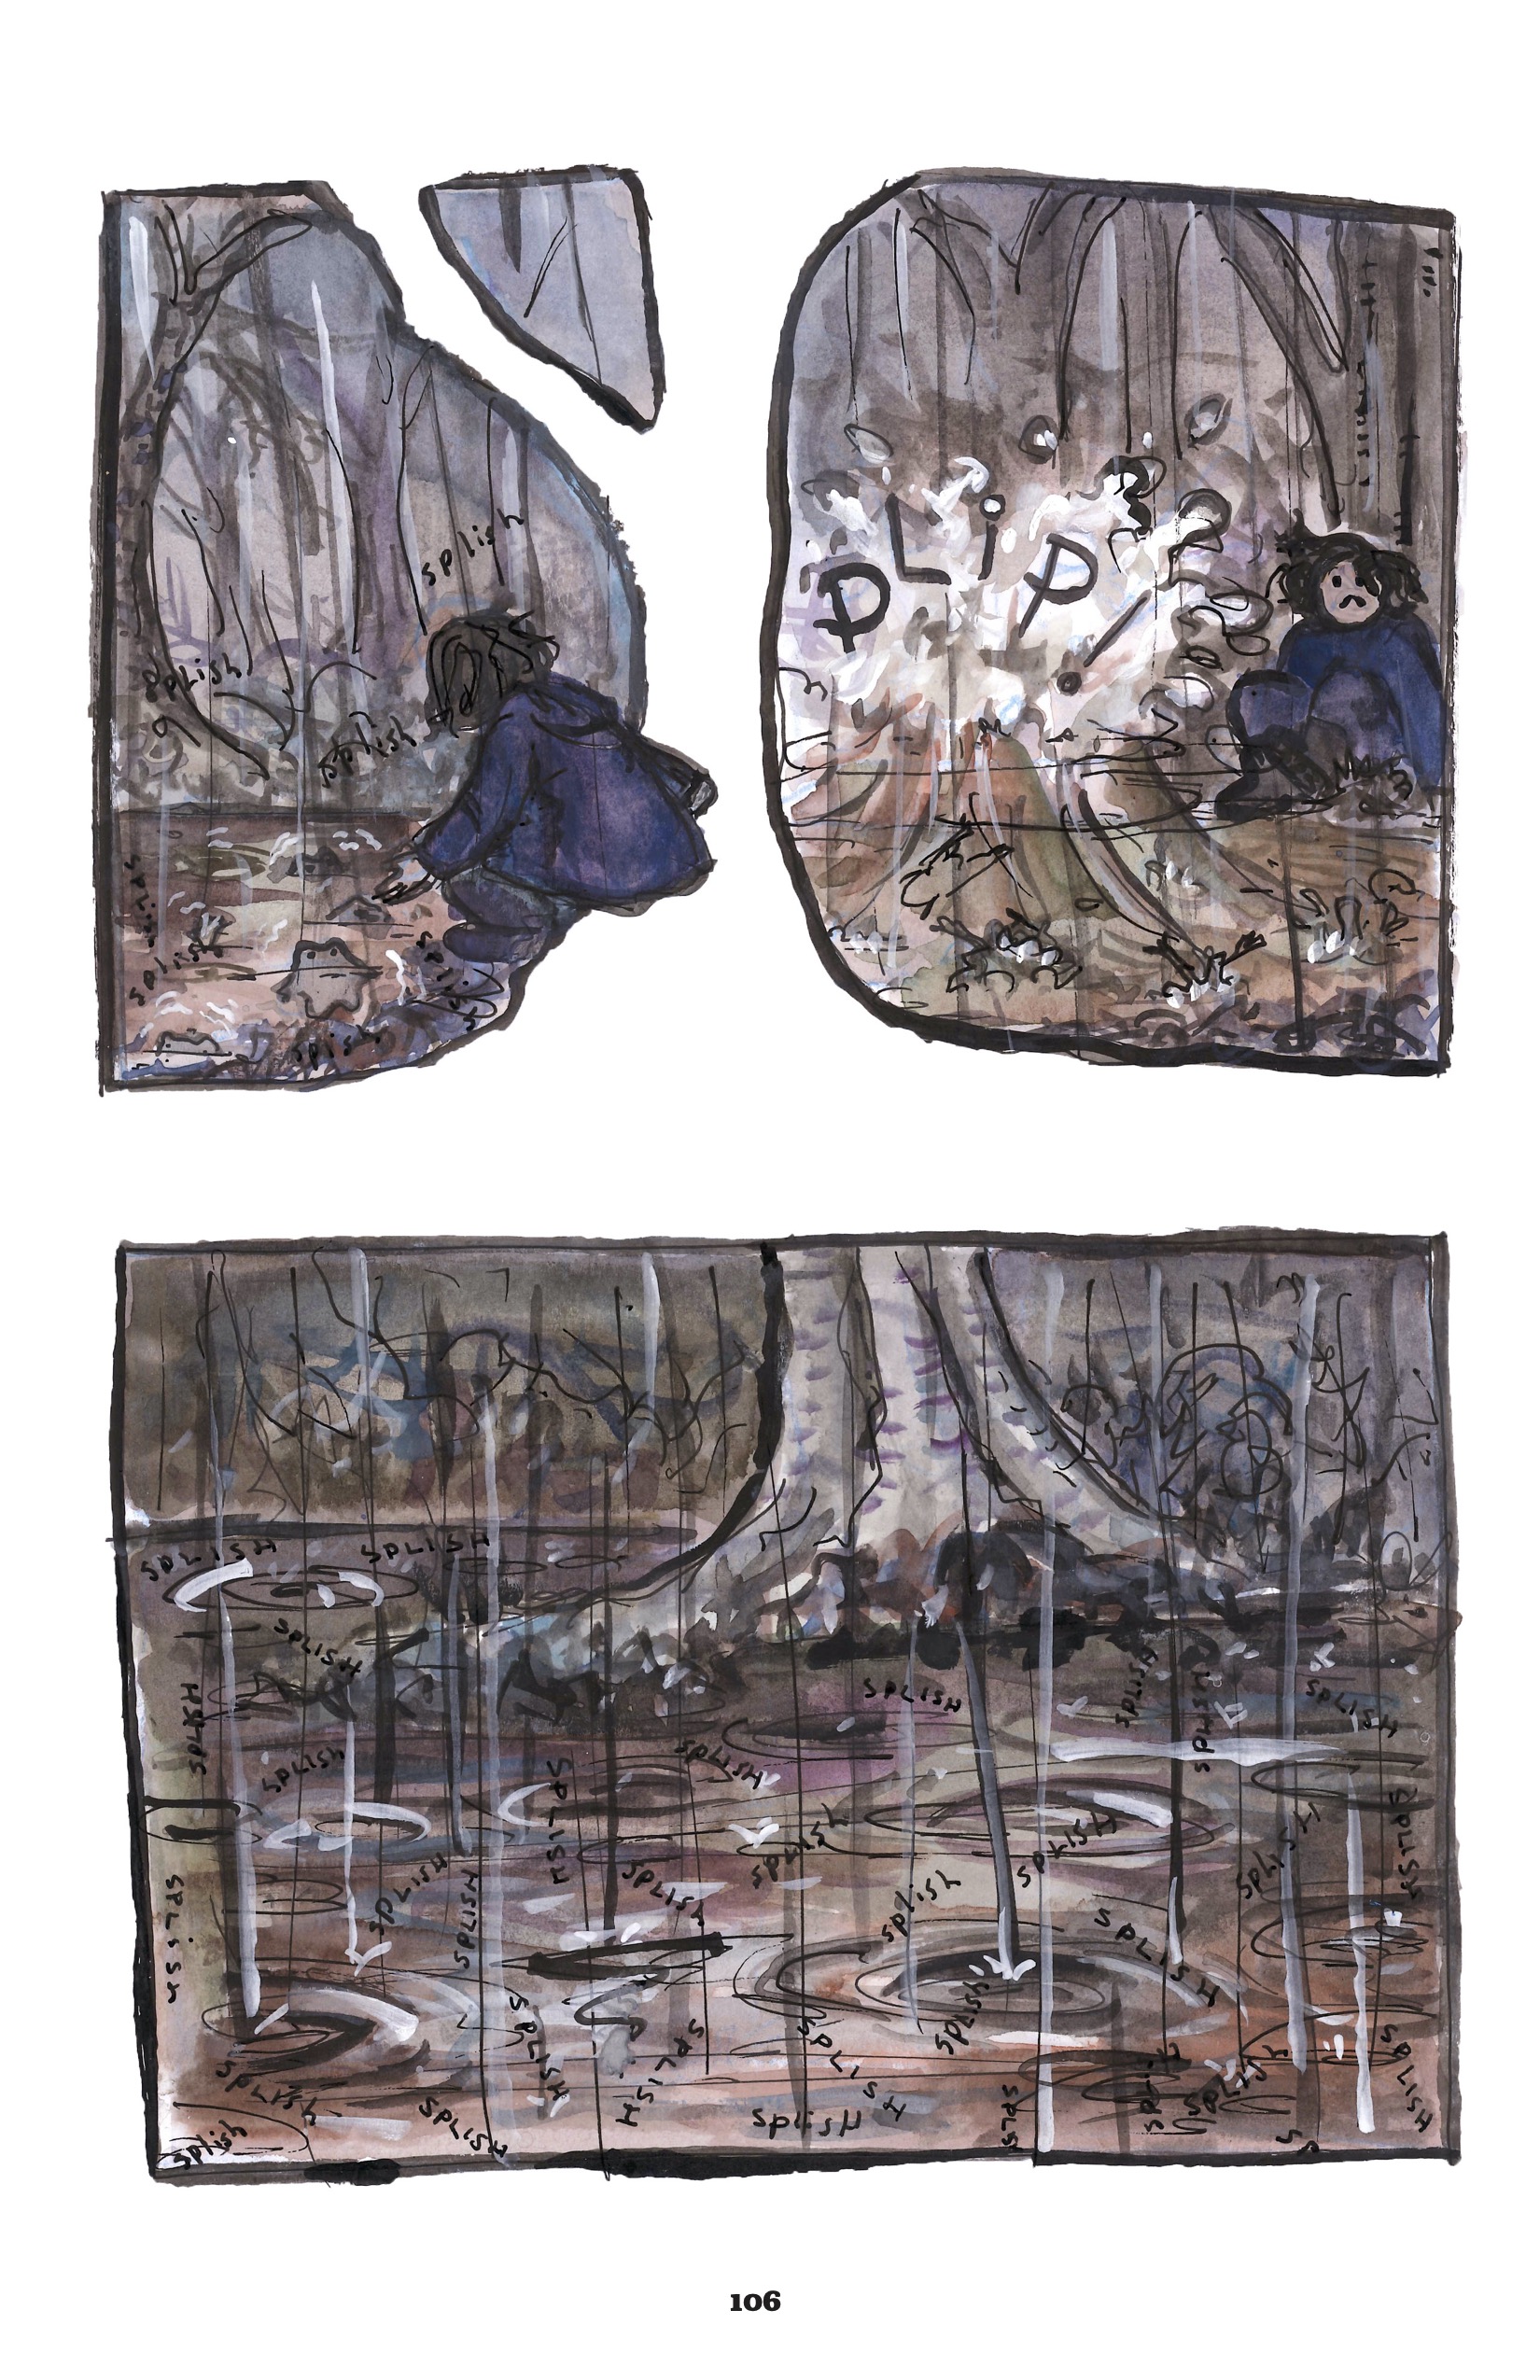 The page returns to purple and blue overtones. This page has a similar layout to the others - divided in half horizontally - but the top panel is fragmented into three. The negative space of the gutters is shaped like a tree trunk and a branch. In the leftmost panel, the figure is crouching down over the little pond and frogs, back to the reader. In the right, the figure, now facing the reader, has backed away slightly from the pond, from which a huge splash of water rises with a â€œPLIIP!â€ The figure is frowning, looking a bit taken aback. In the lower half, we return to a shot of just the water, which is now empty of frogs, who disappeared and left only ripples in their wake. The roots and base trunk of a tree rise out of the water in the background; it is still raining. There are even more splishes in this panel.